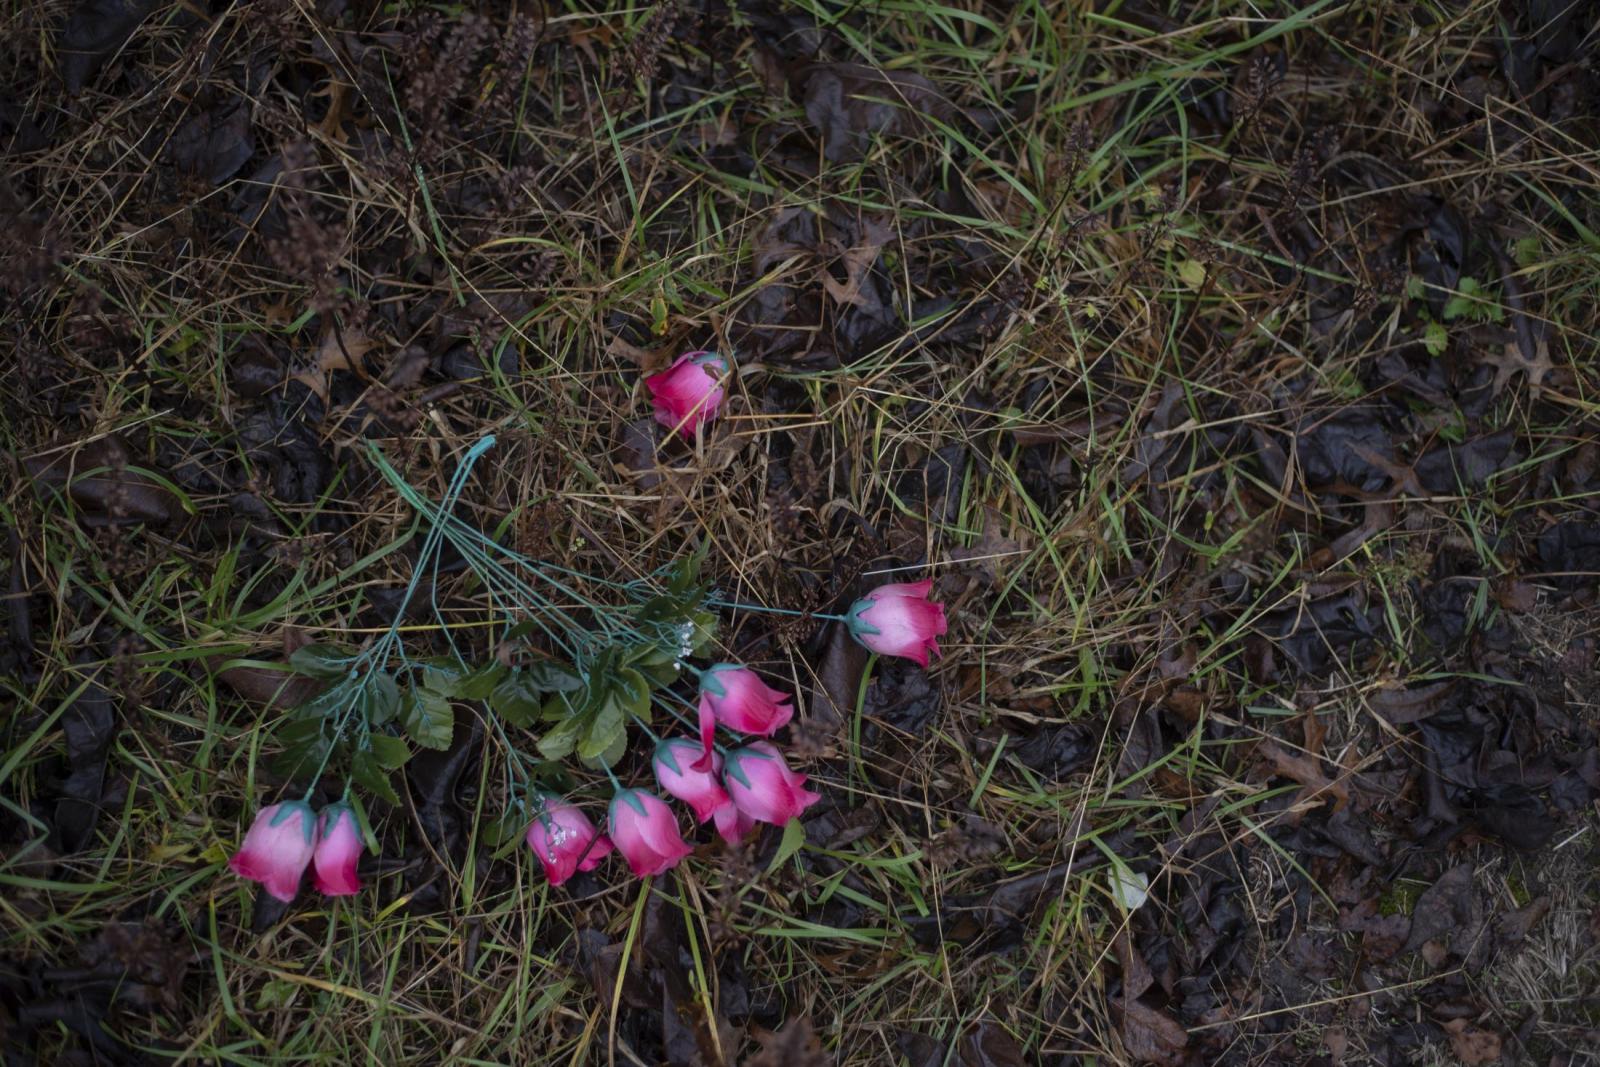 From this earth - Flowers set out in memory of Wilma are blown down by the wind Nov. 25. She held Easter picnics...